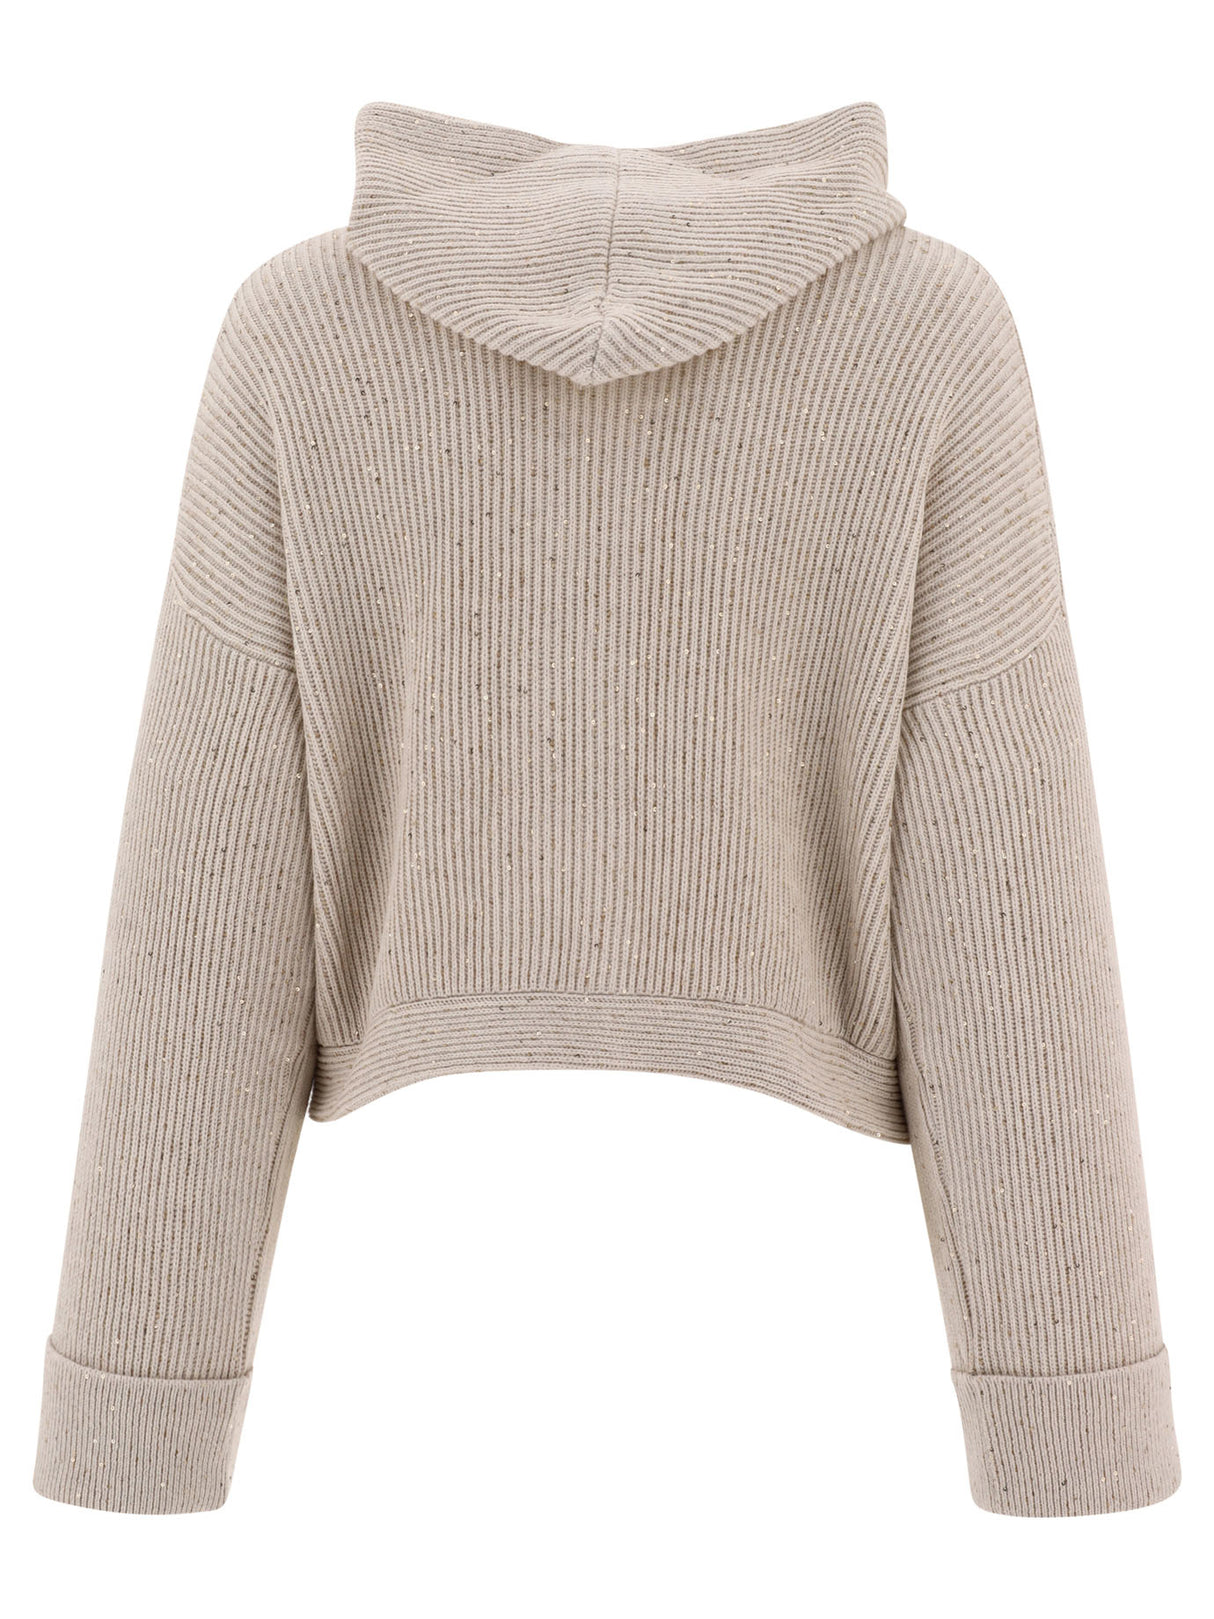 BRUNELLO CUCINELLI Beige Hooded Cardigan with Shiny Tab for Women - SS24 Collection